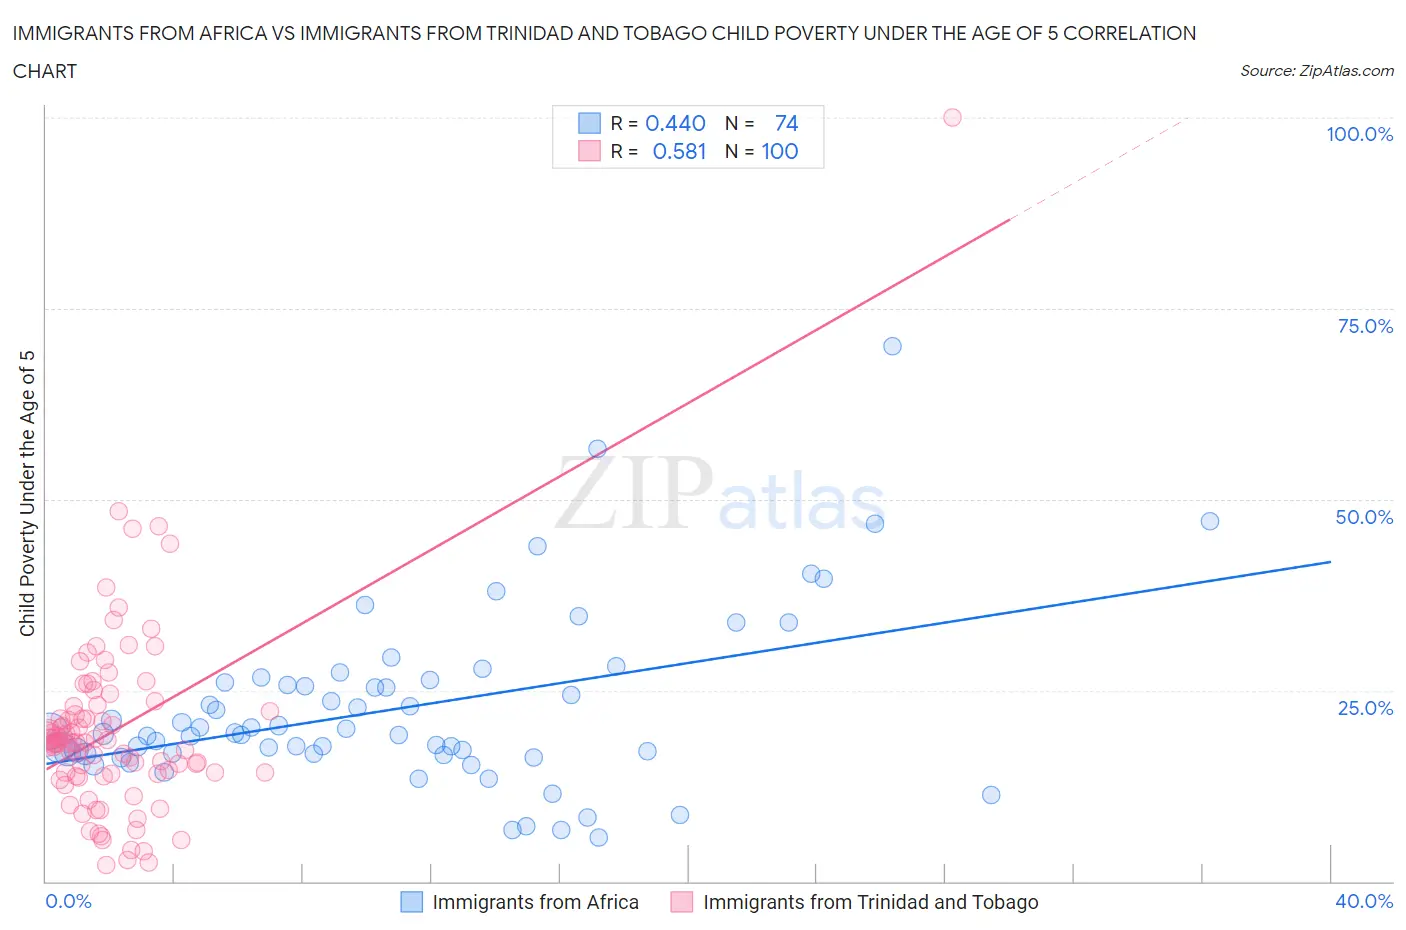 Immigrants from Africa vs Immigrants from Trinidad and Tobago Child Poverty Under the Age of 5